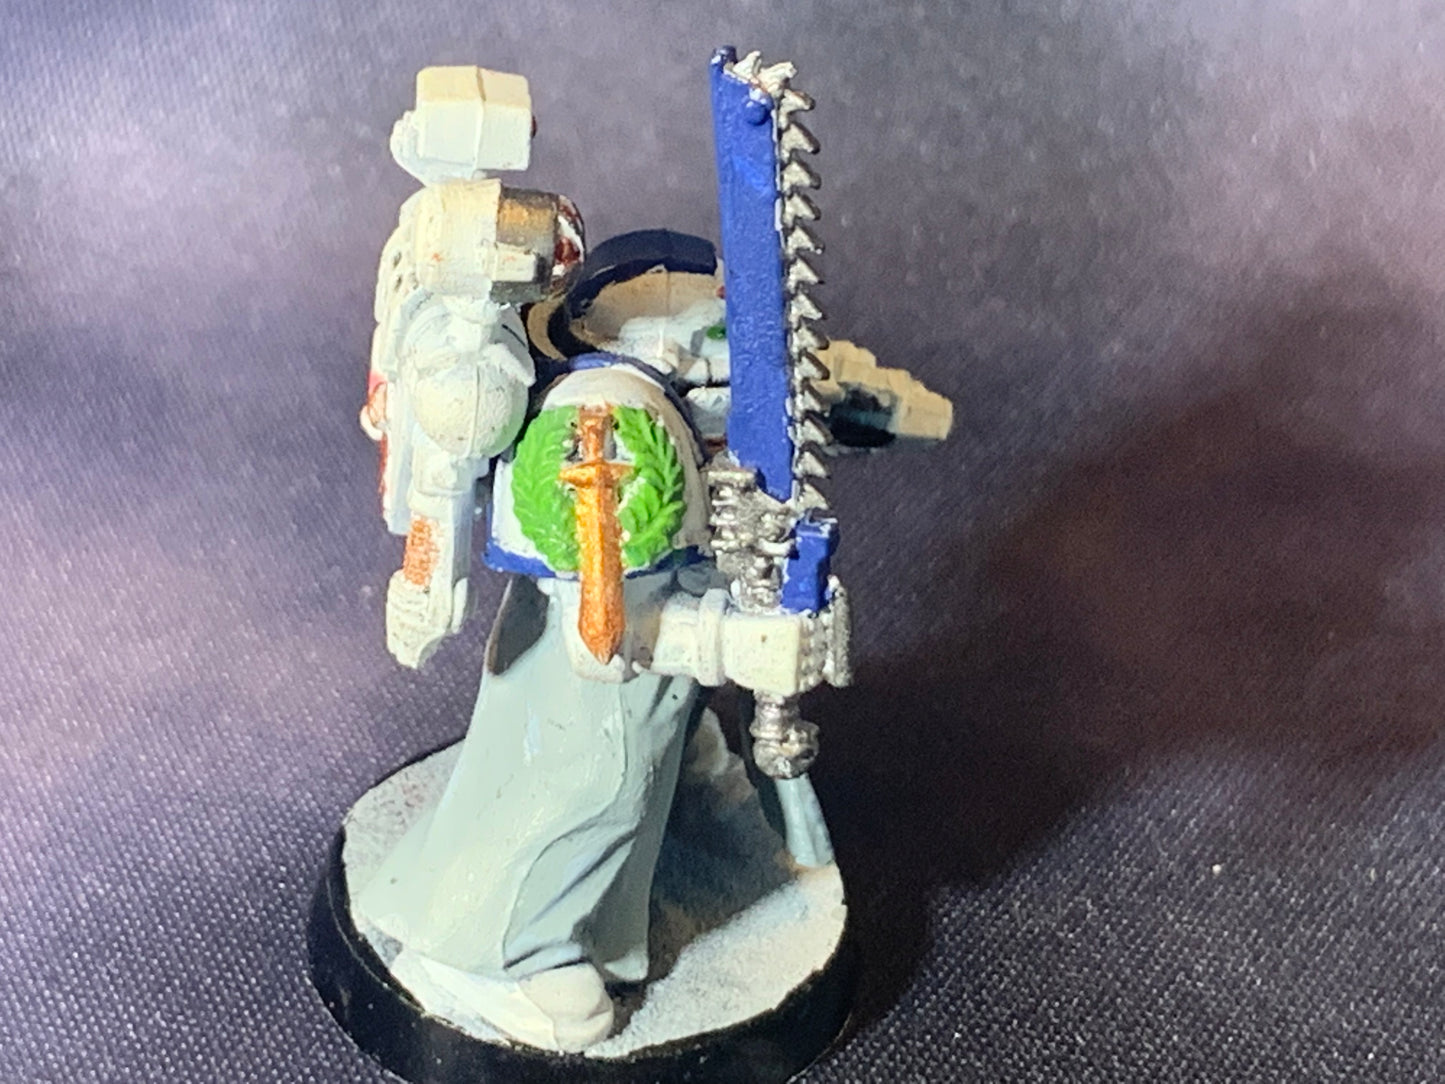 Warhammer 40k Space Marines Apothecary